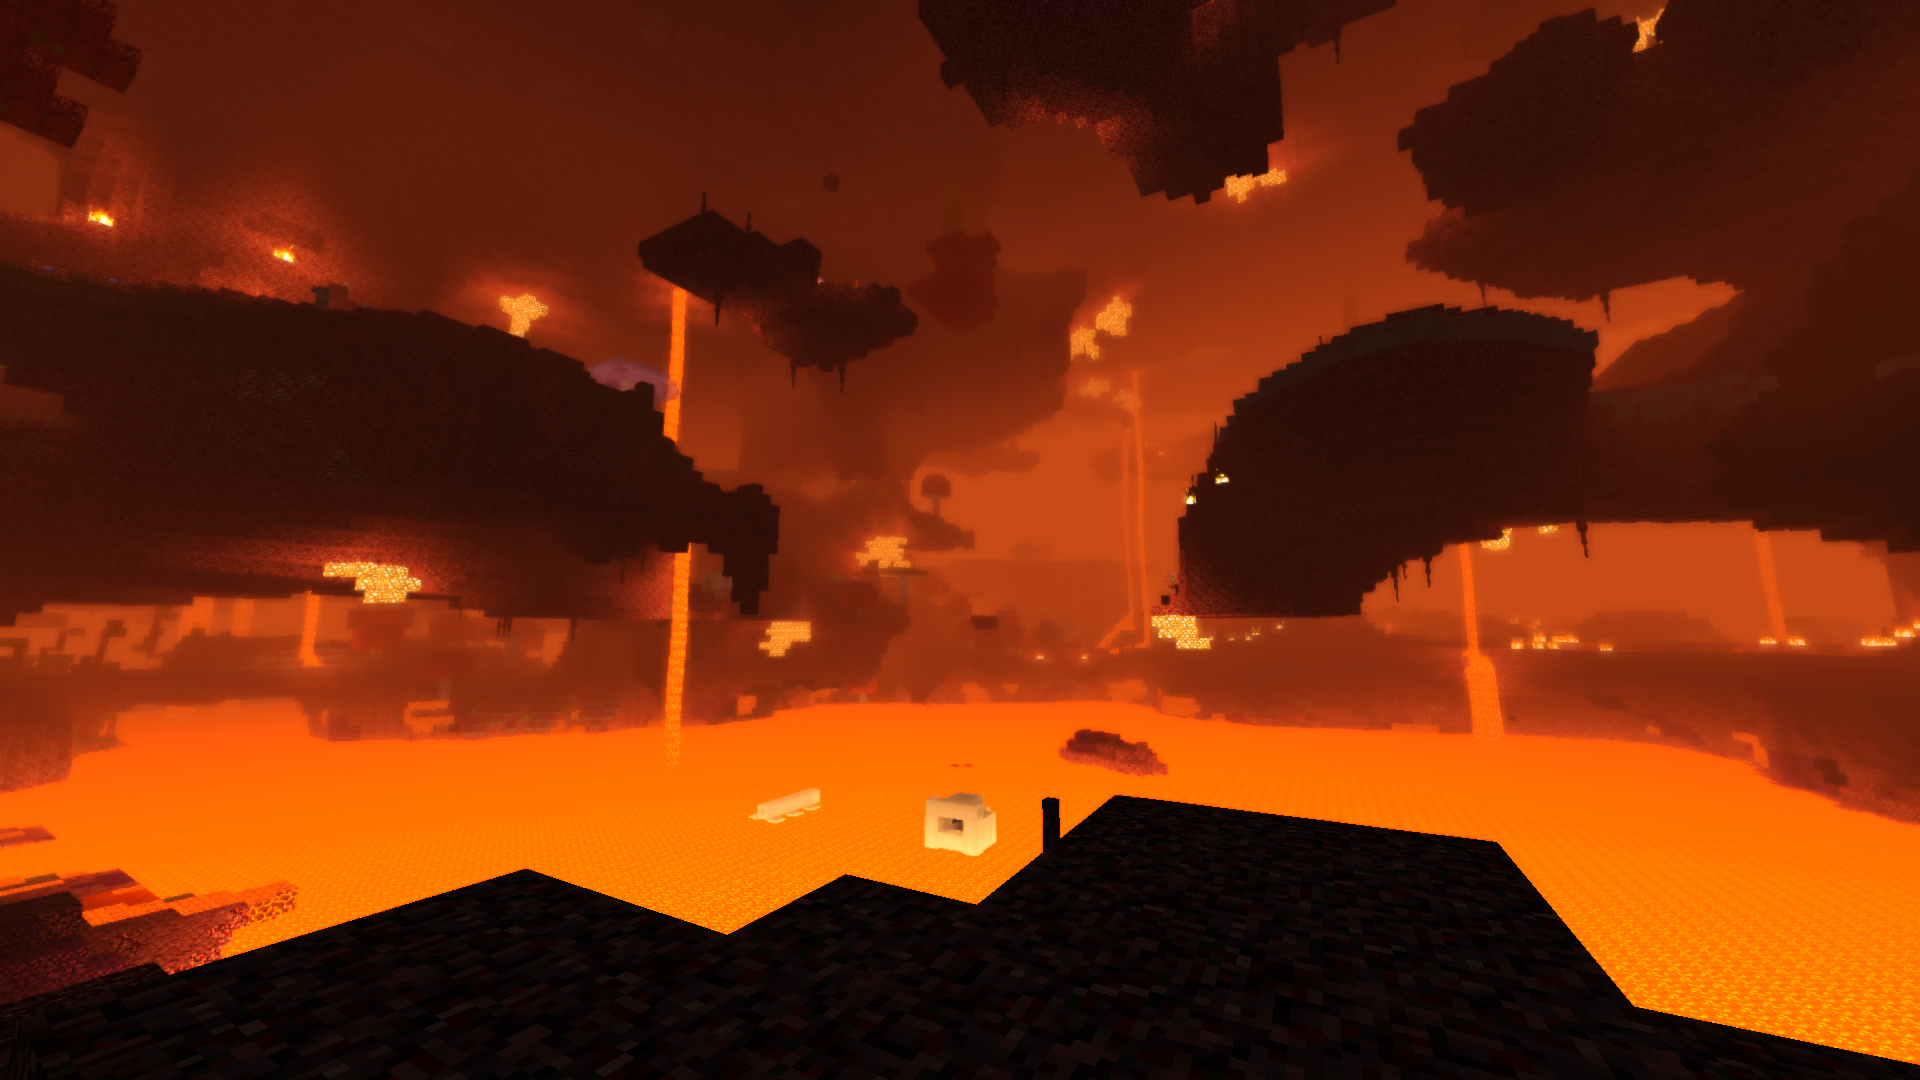 Modded Nether + Shaders looks amazing